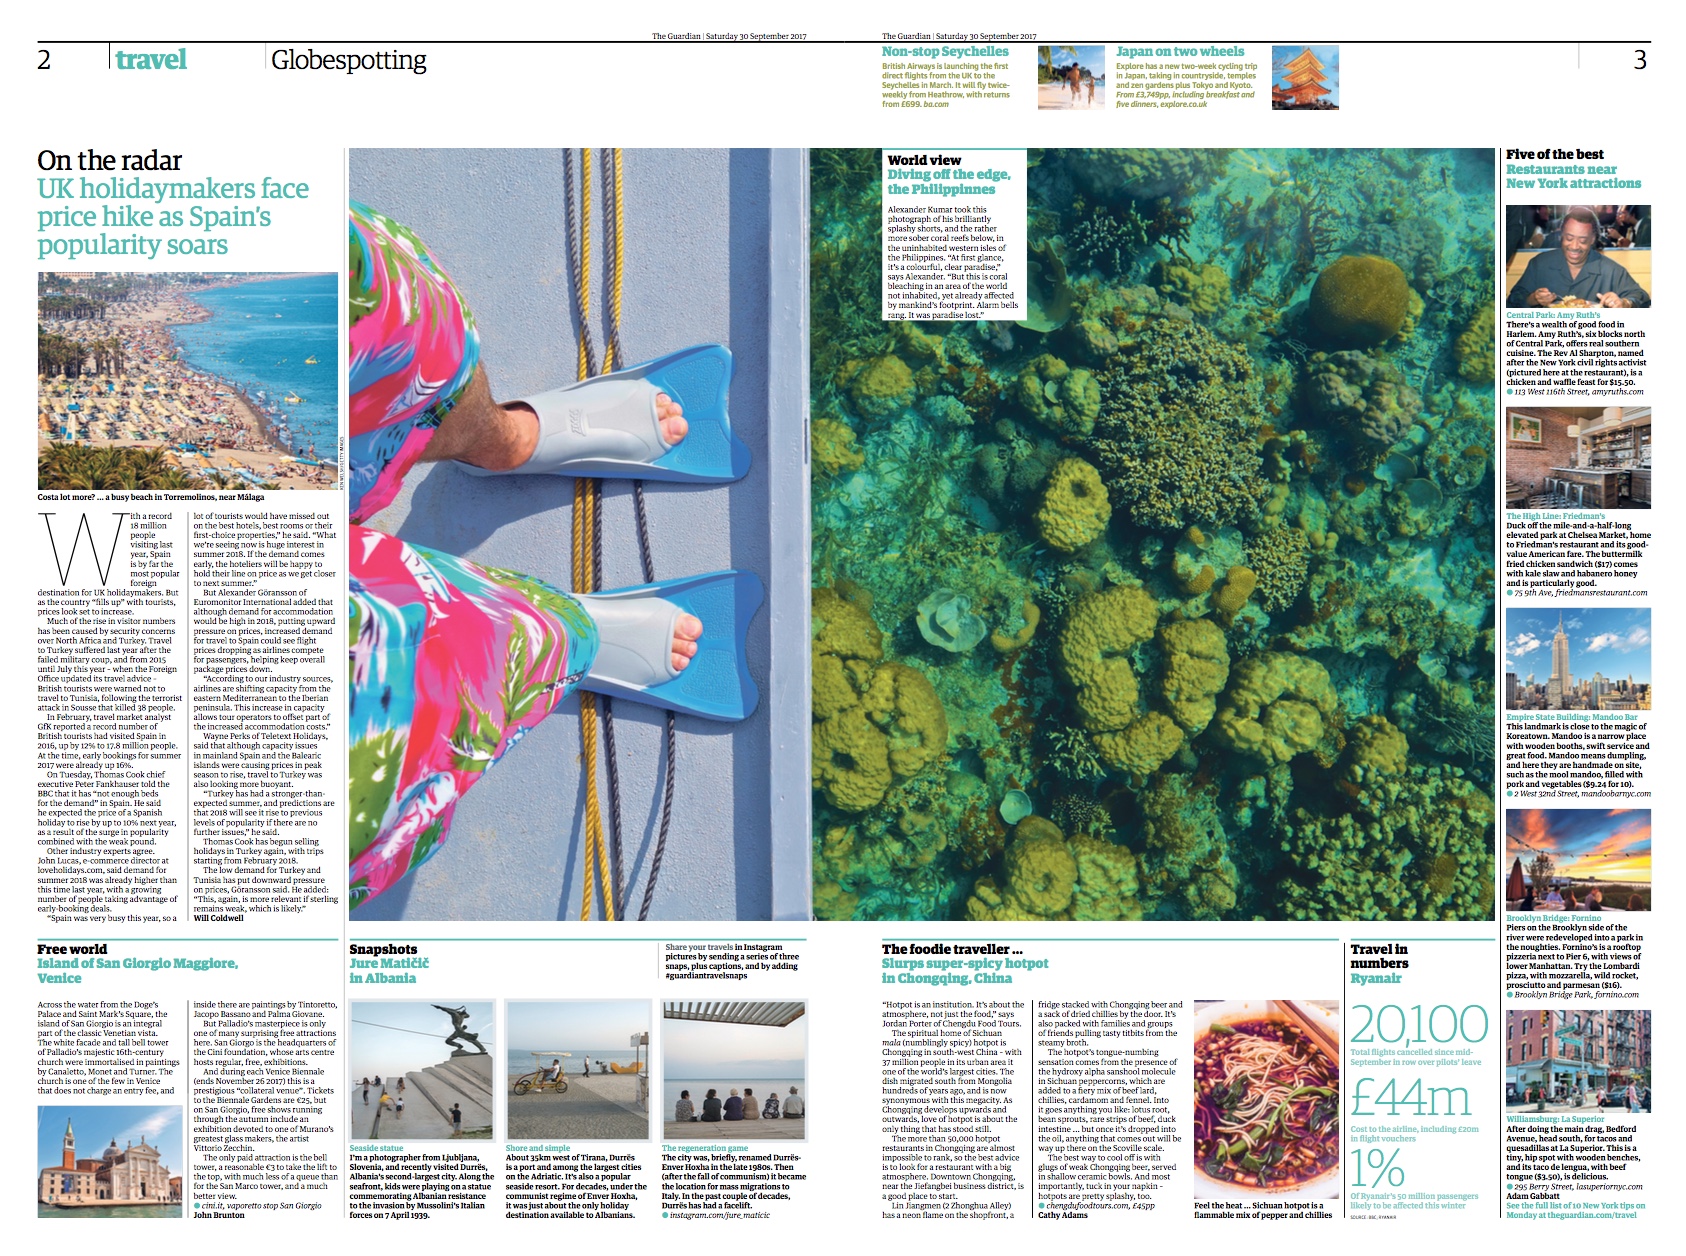 guardian travel section